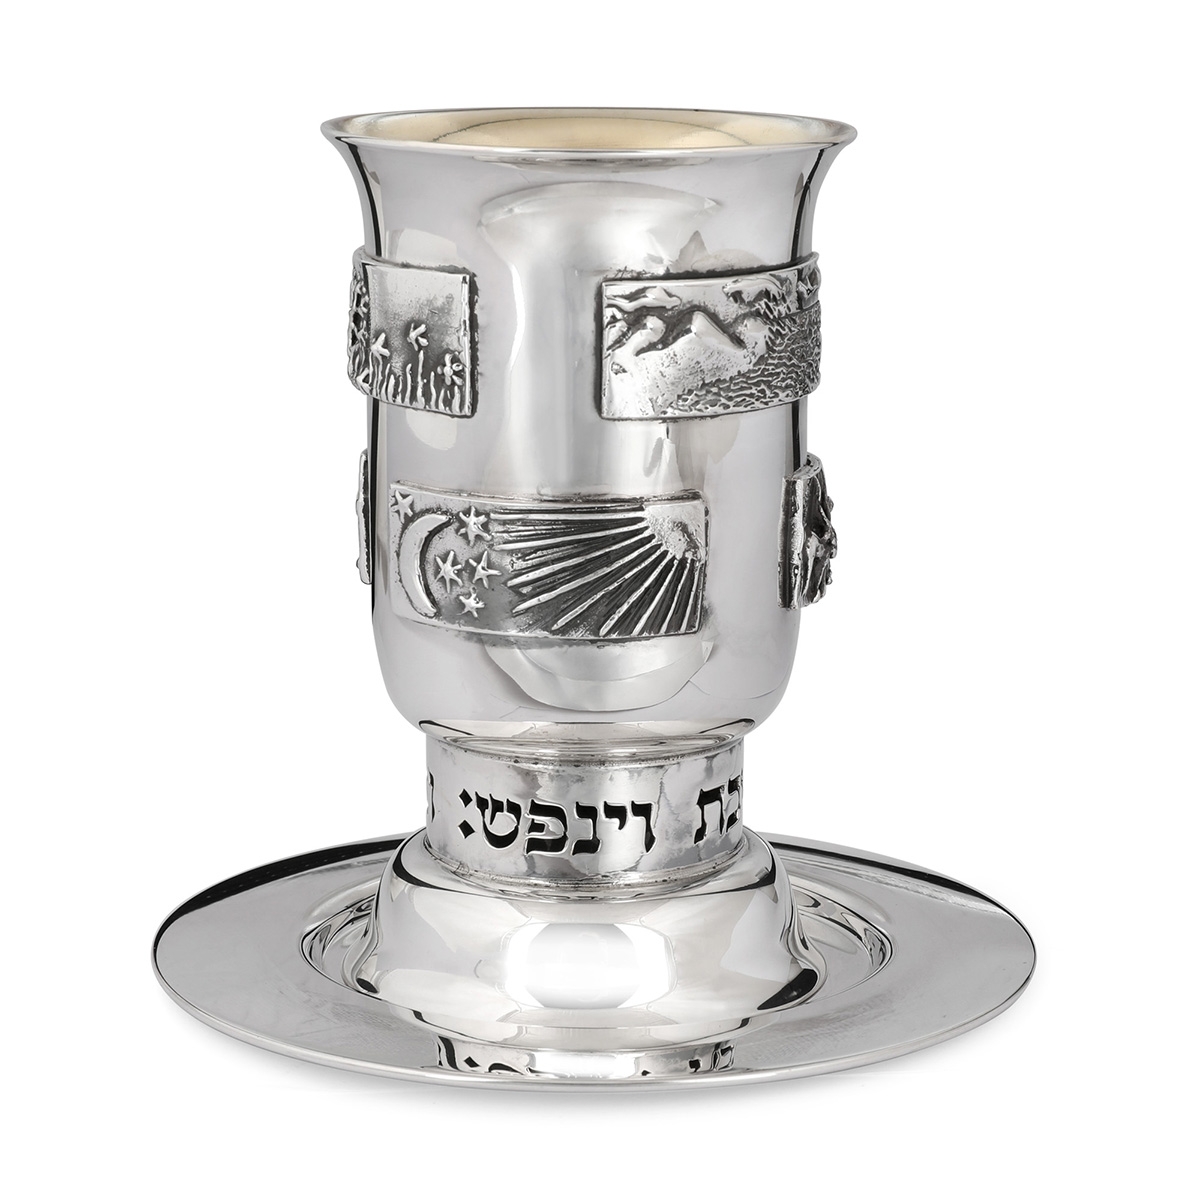 Bier Judaica Handcrafted Sterling Silver Kiddush Cup Set – Seven Days of Creation - 1